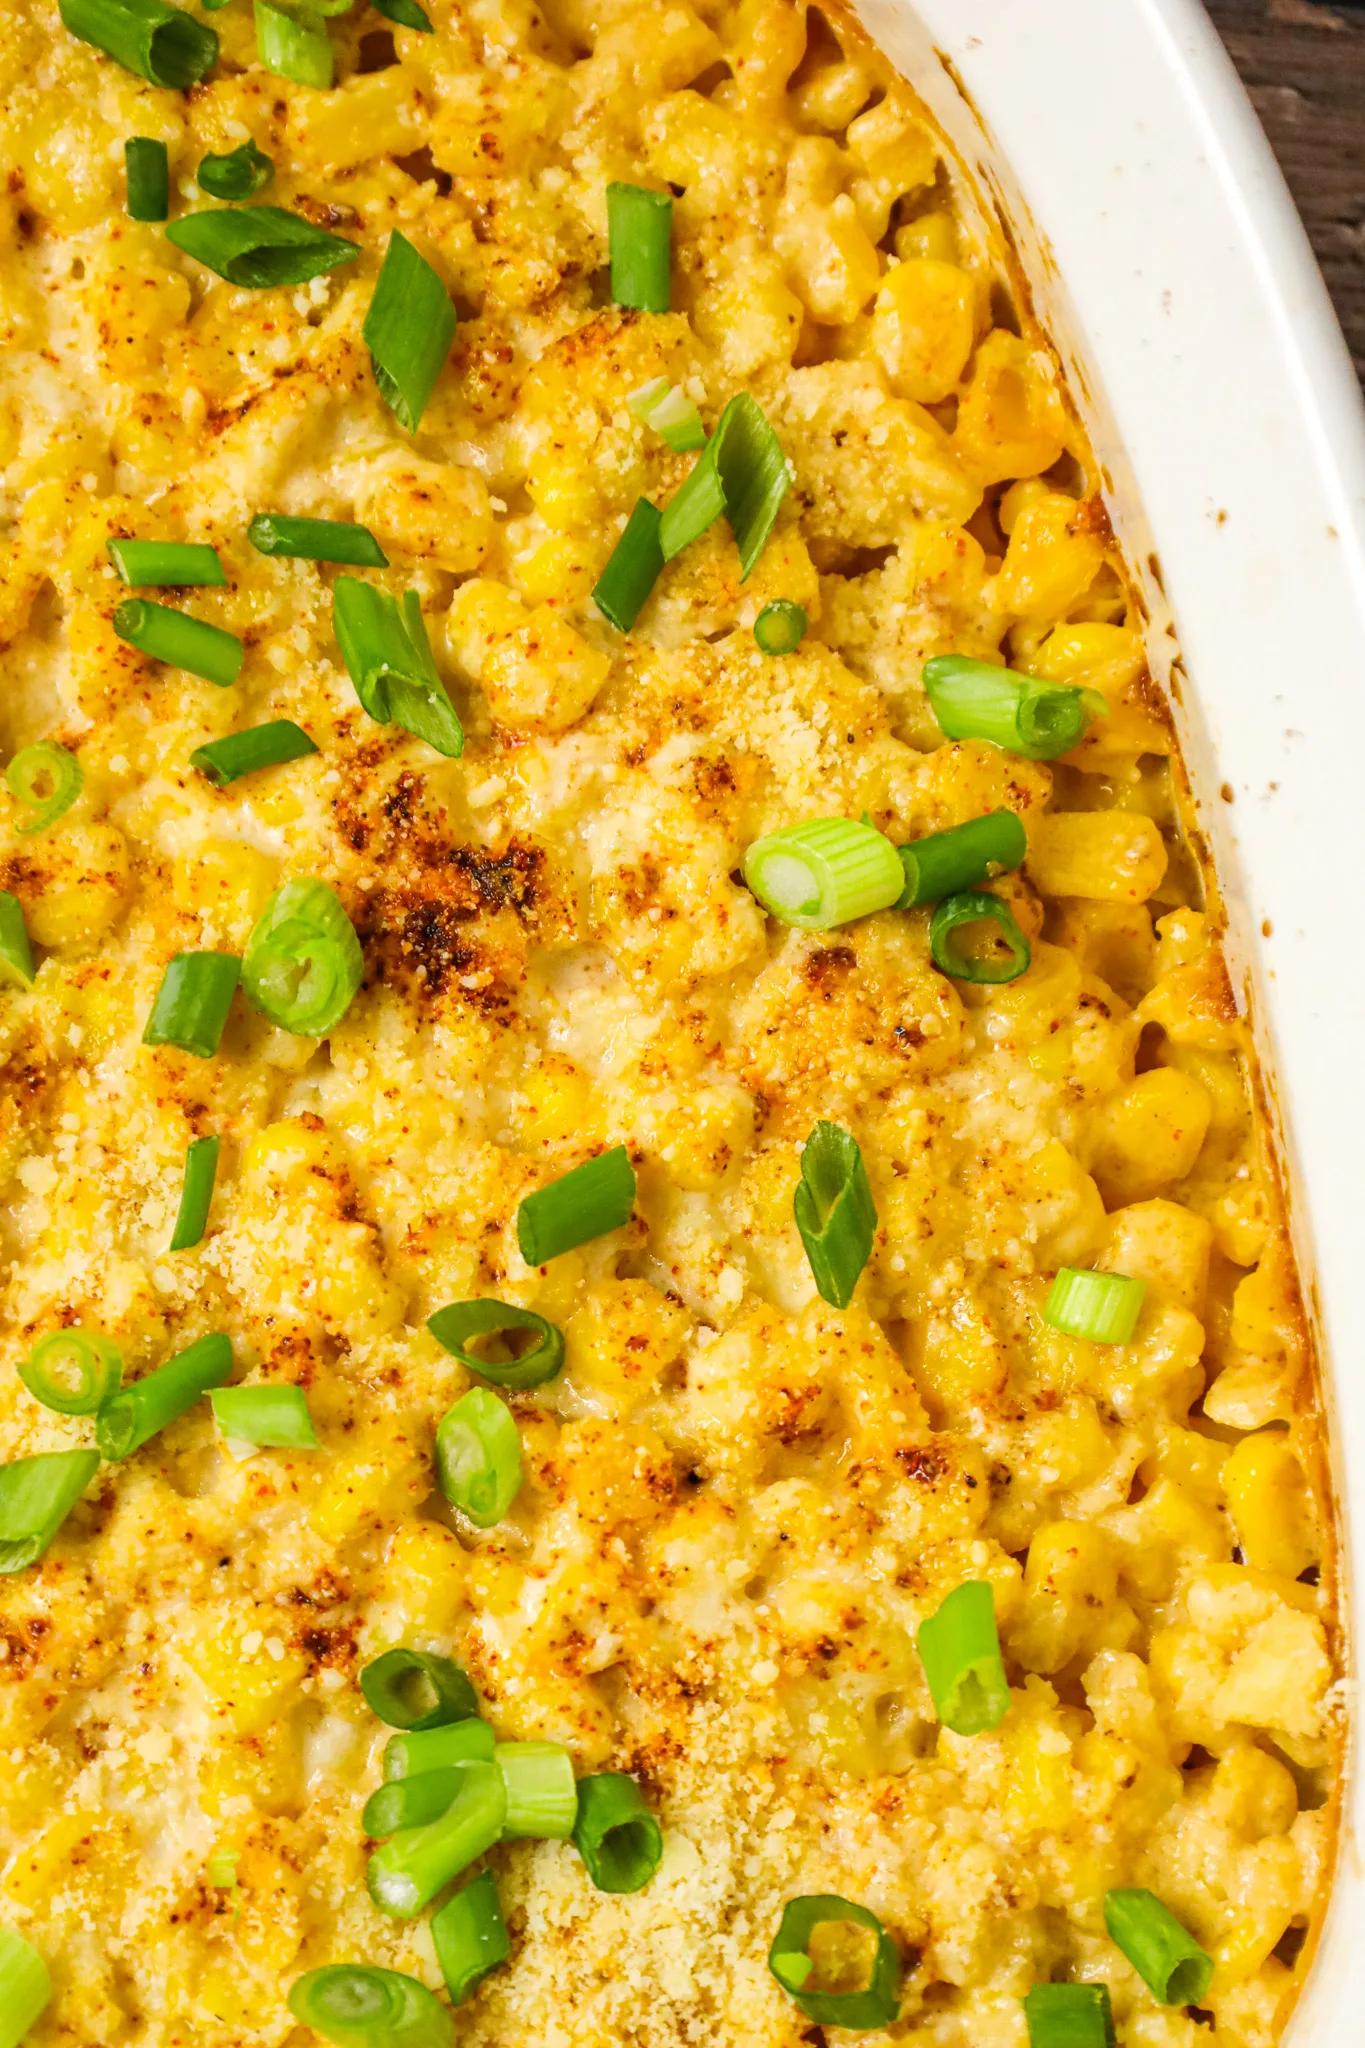 Mexican Corn Casserole is a creamy corn casserole made with frozen corn kernels tossed in sour cream, mayo, chili powder, garlic powder and parmesan cheese.